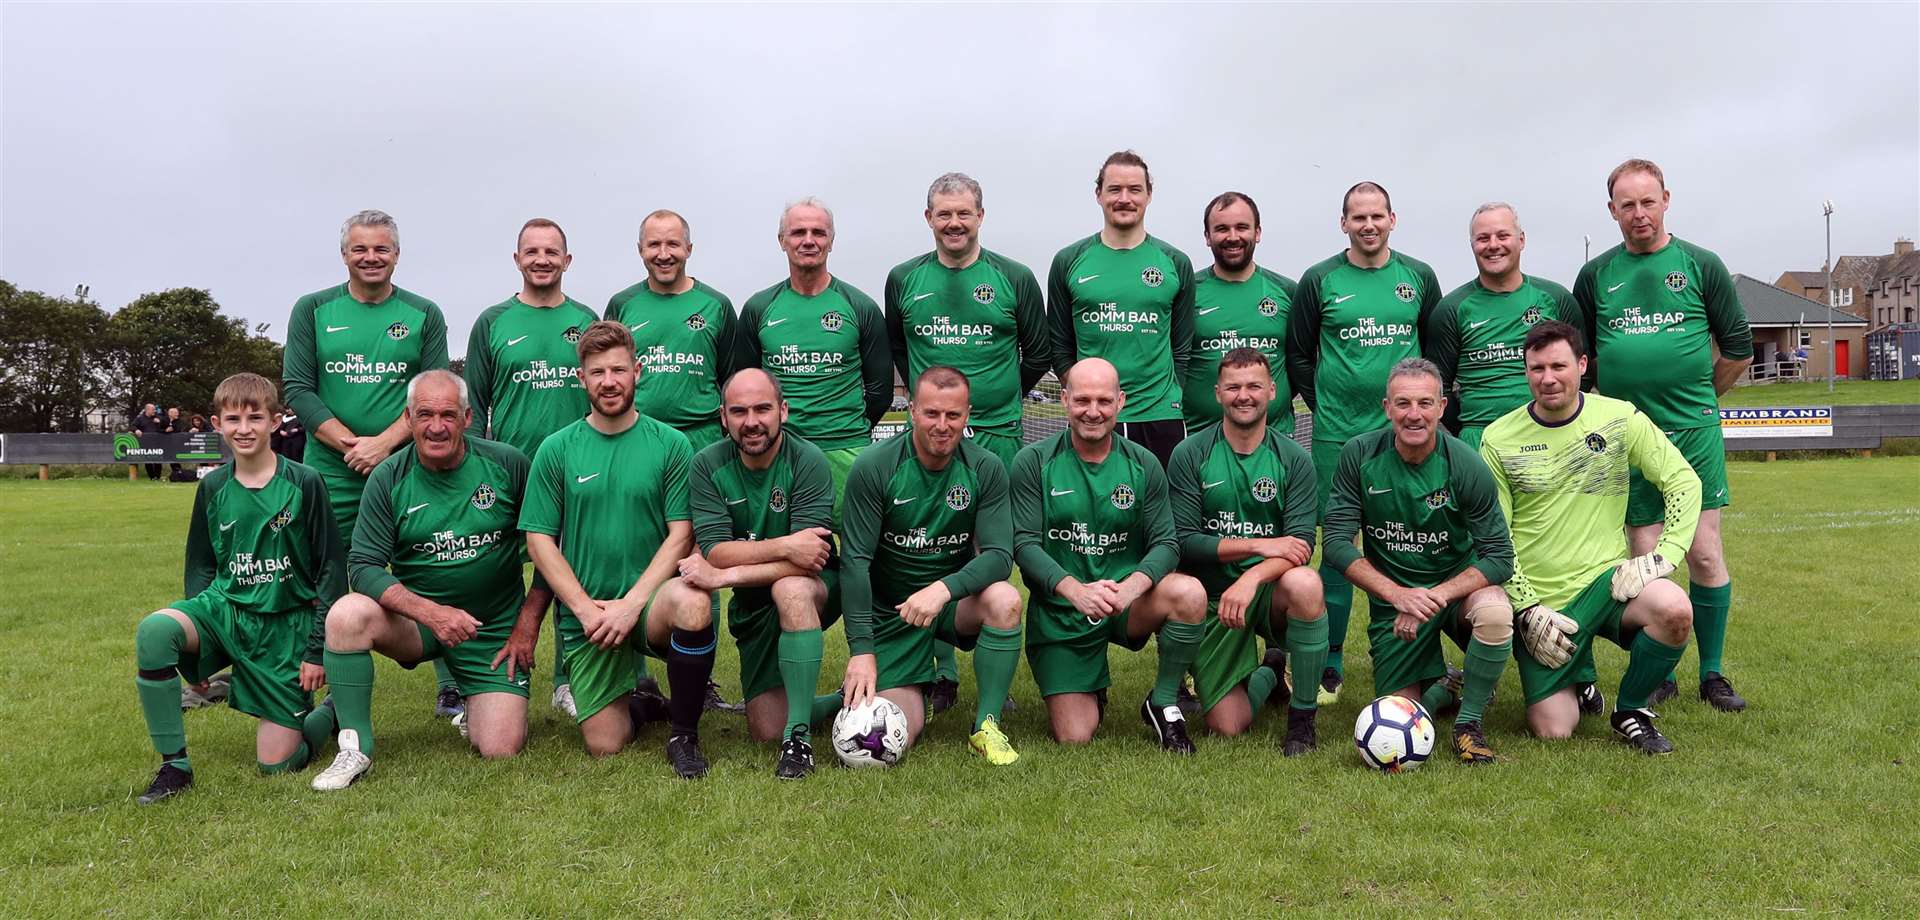 The Thurso Pentland Legends team that reunited for the club's 100th anniversary event. They went down narrowly to the current side in a 6-5 defeat. Picture: James Gunn